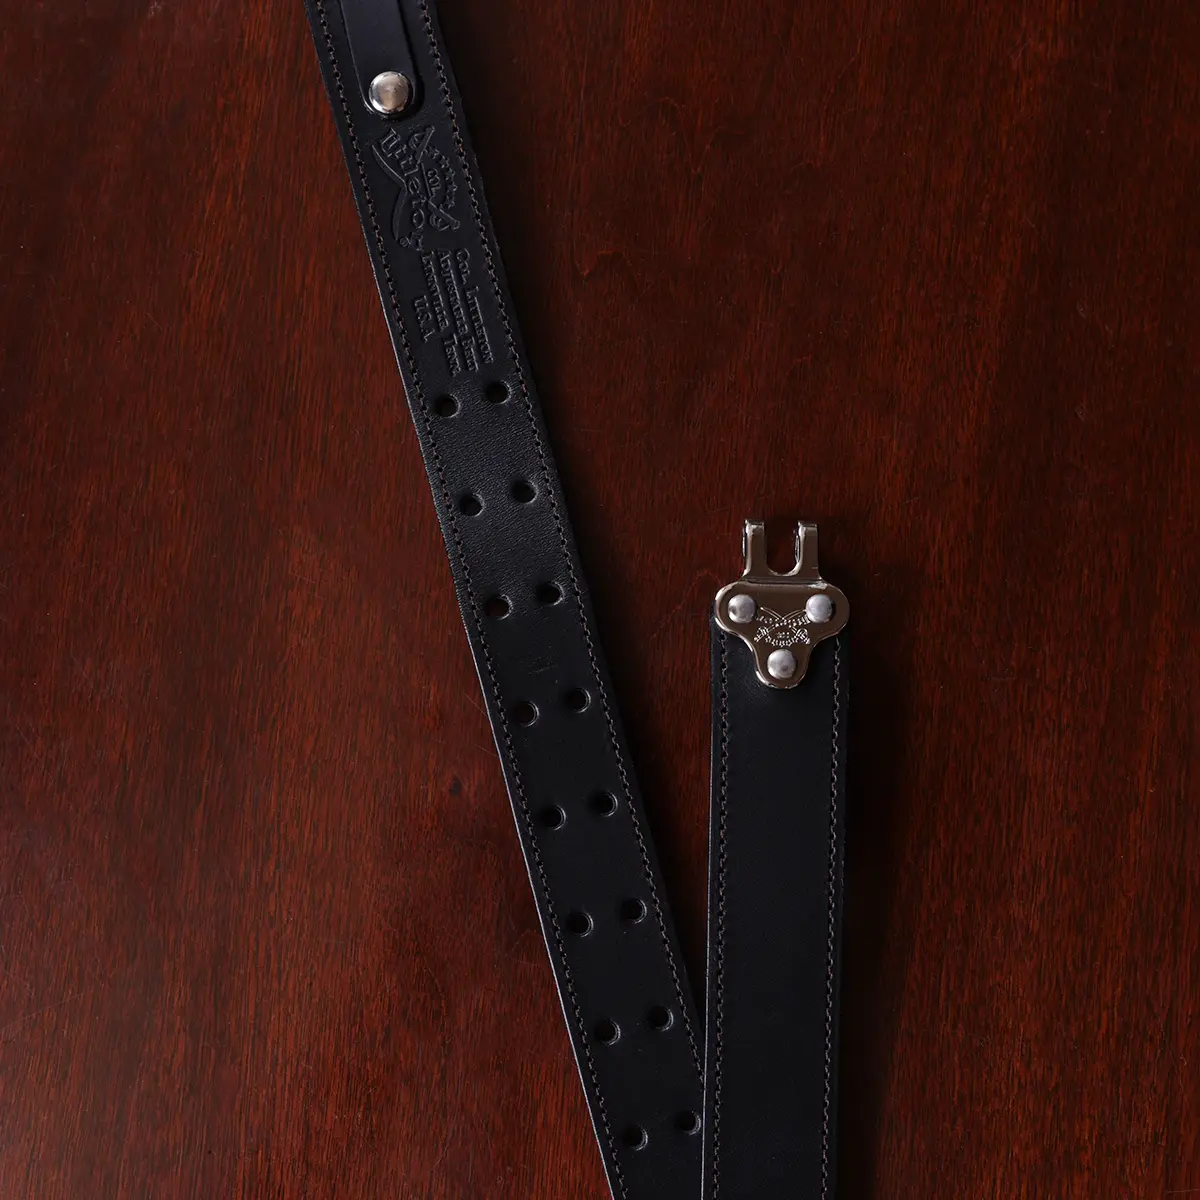 No. 5 Leather Cinch Belt - Italian Bridle Leather - Brown Leather with Brass, Large - Fits Sizes 34 - 42